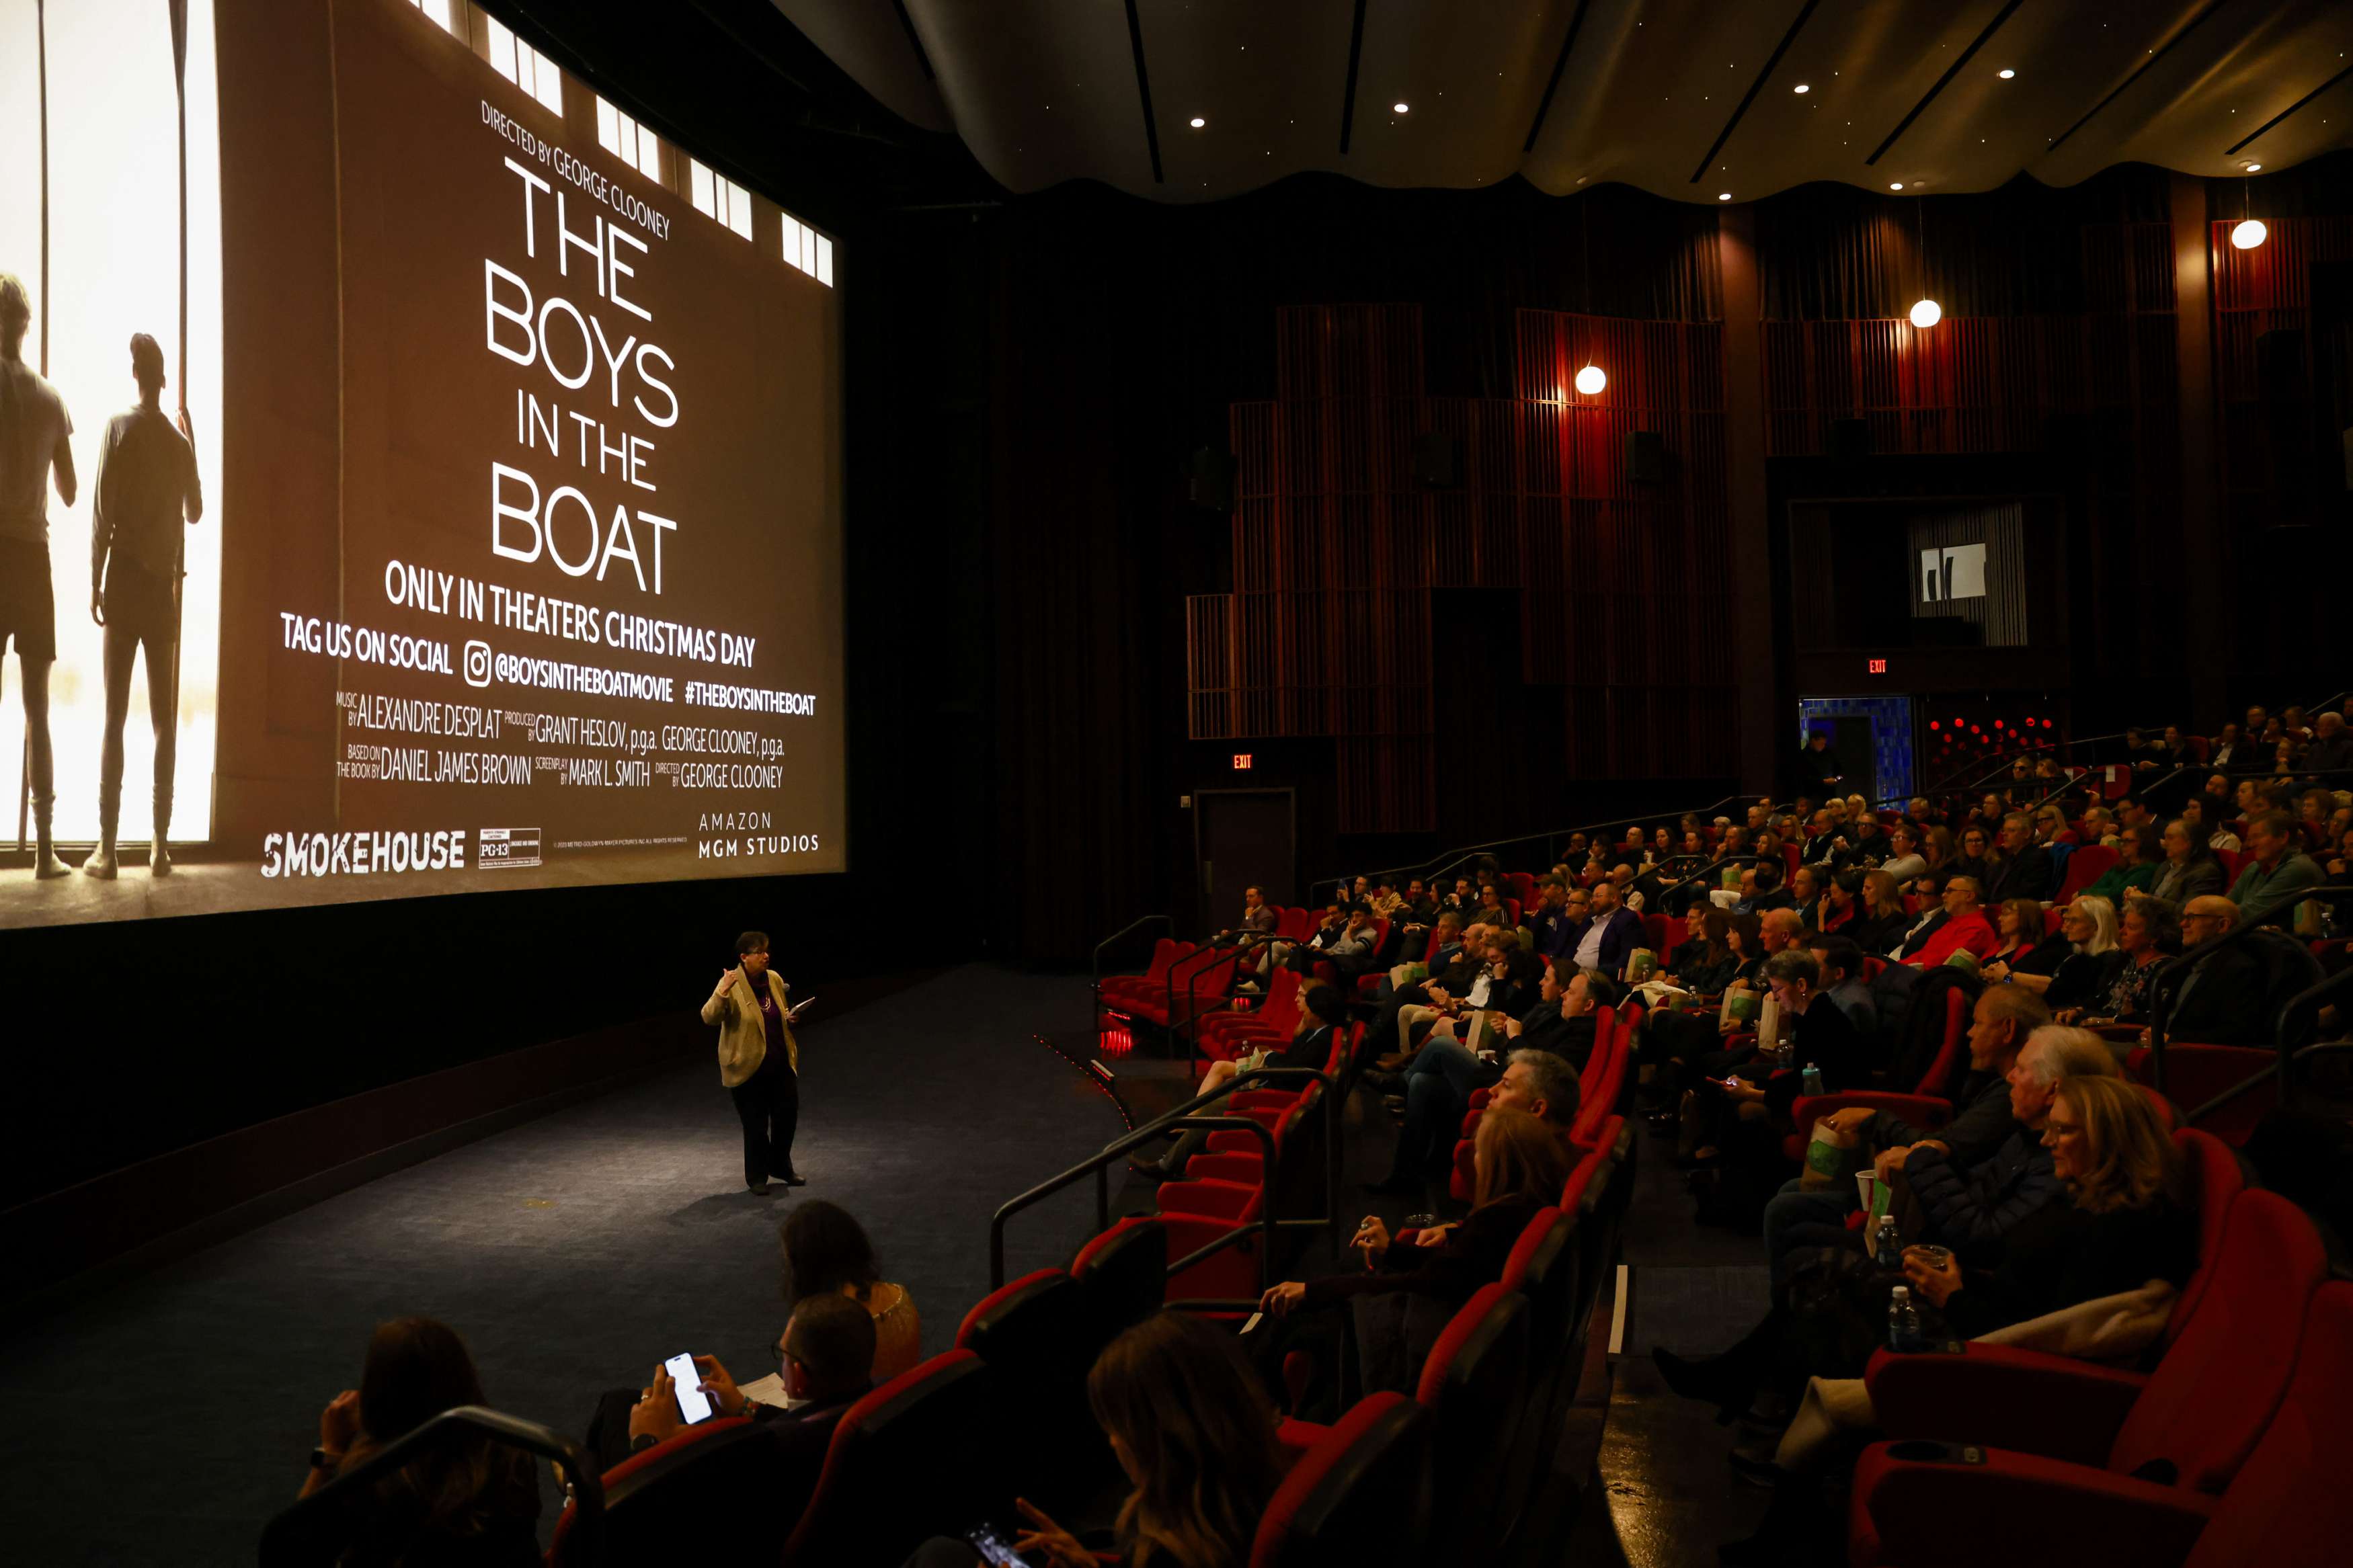 A full movie theater with a screen that says "The Boys in the Boat"